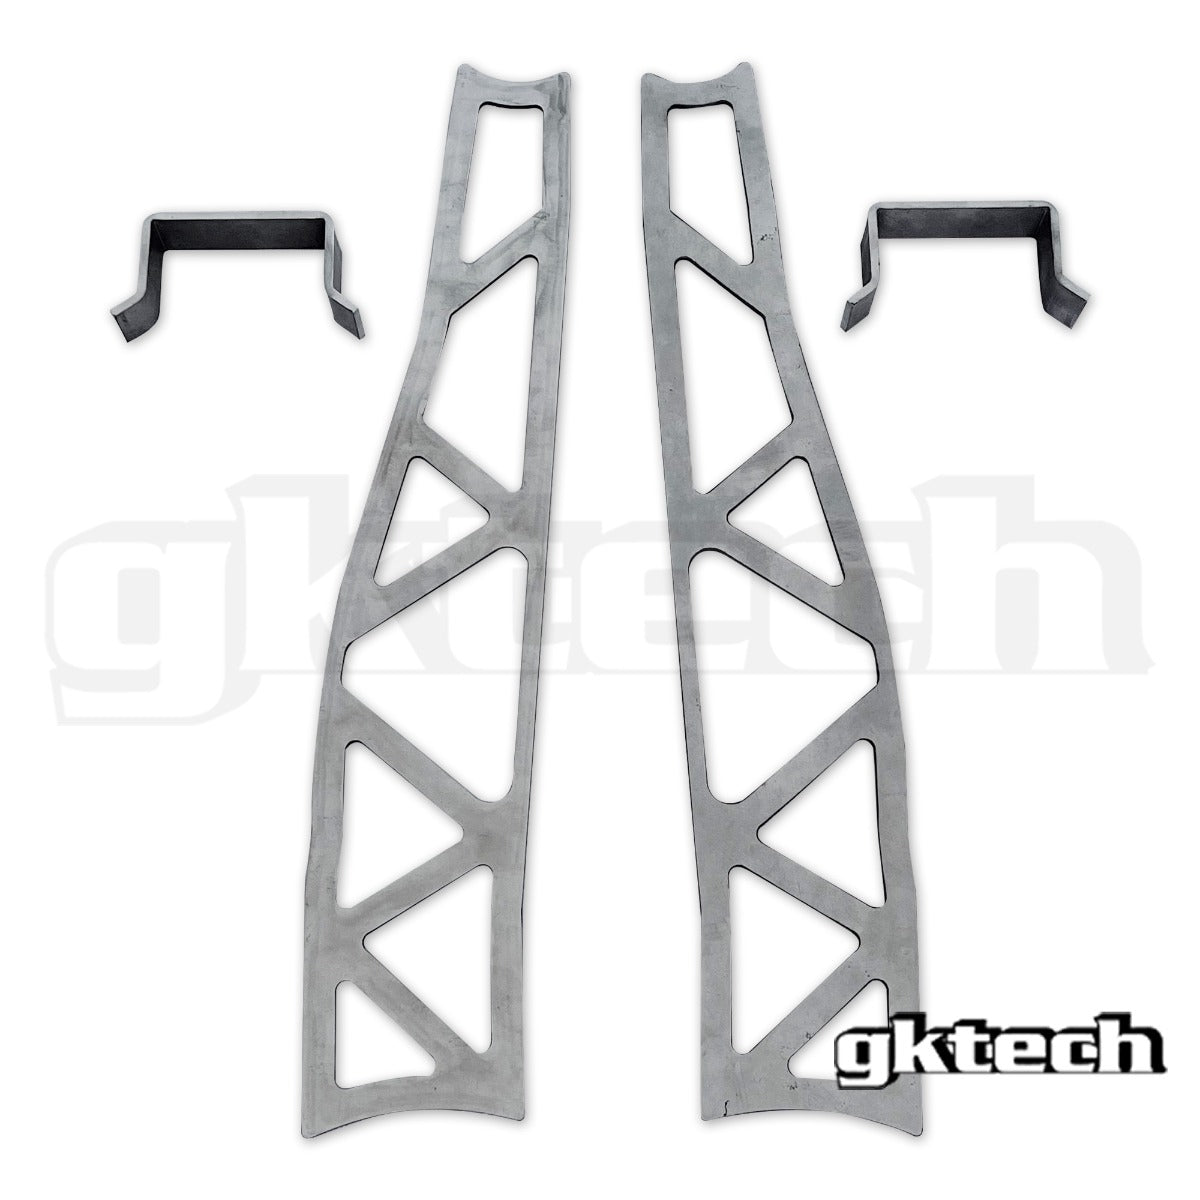 240sx/Skyline chassis (RWD) Front LCA weld in reinforcement plates